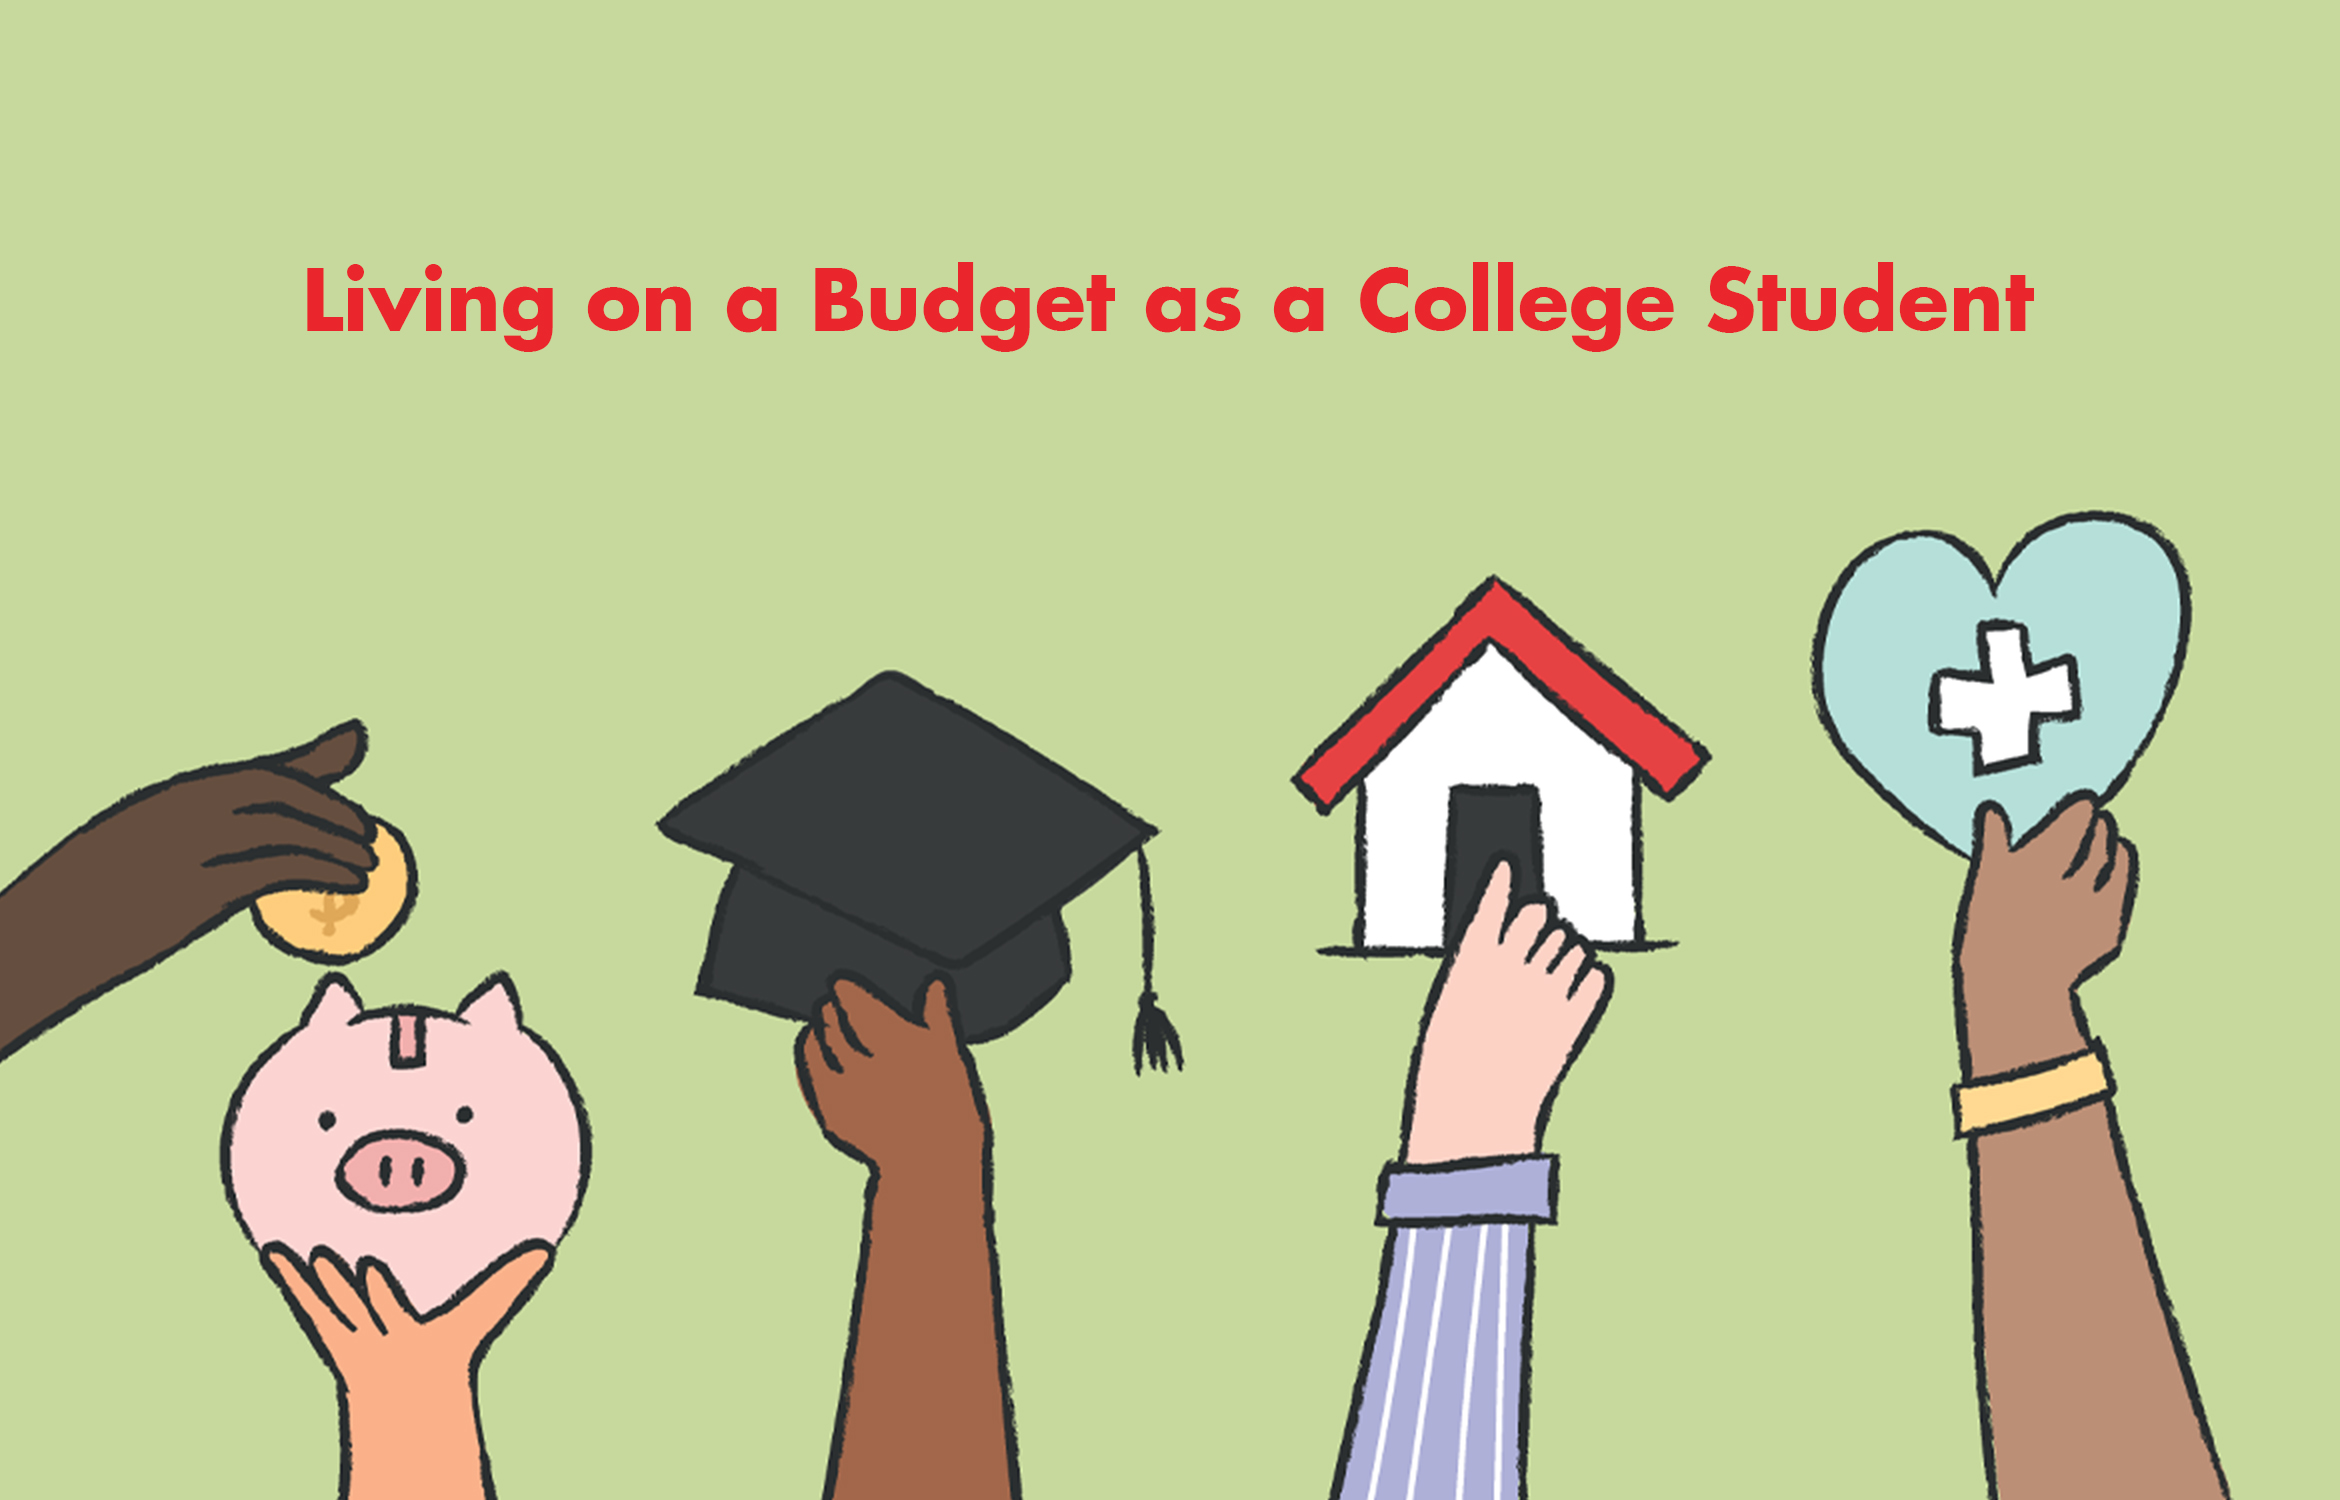 Living on a Budget as a College Student